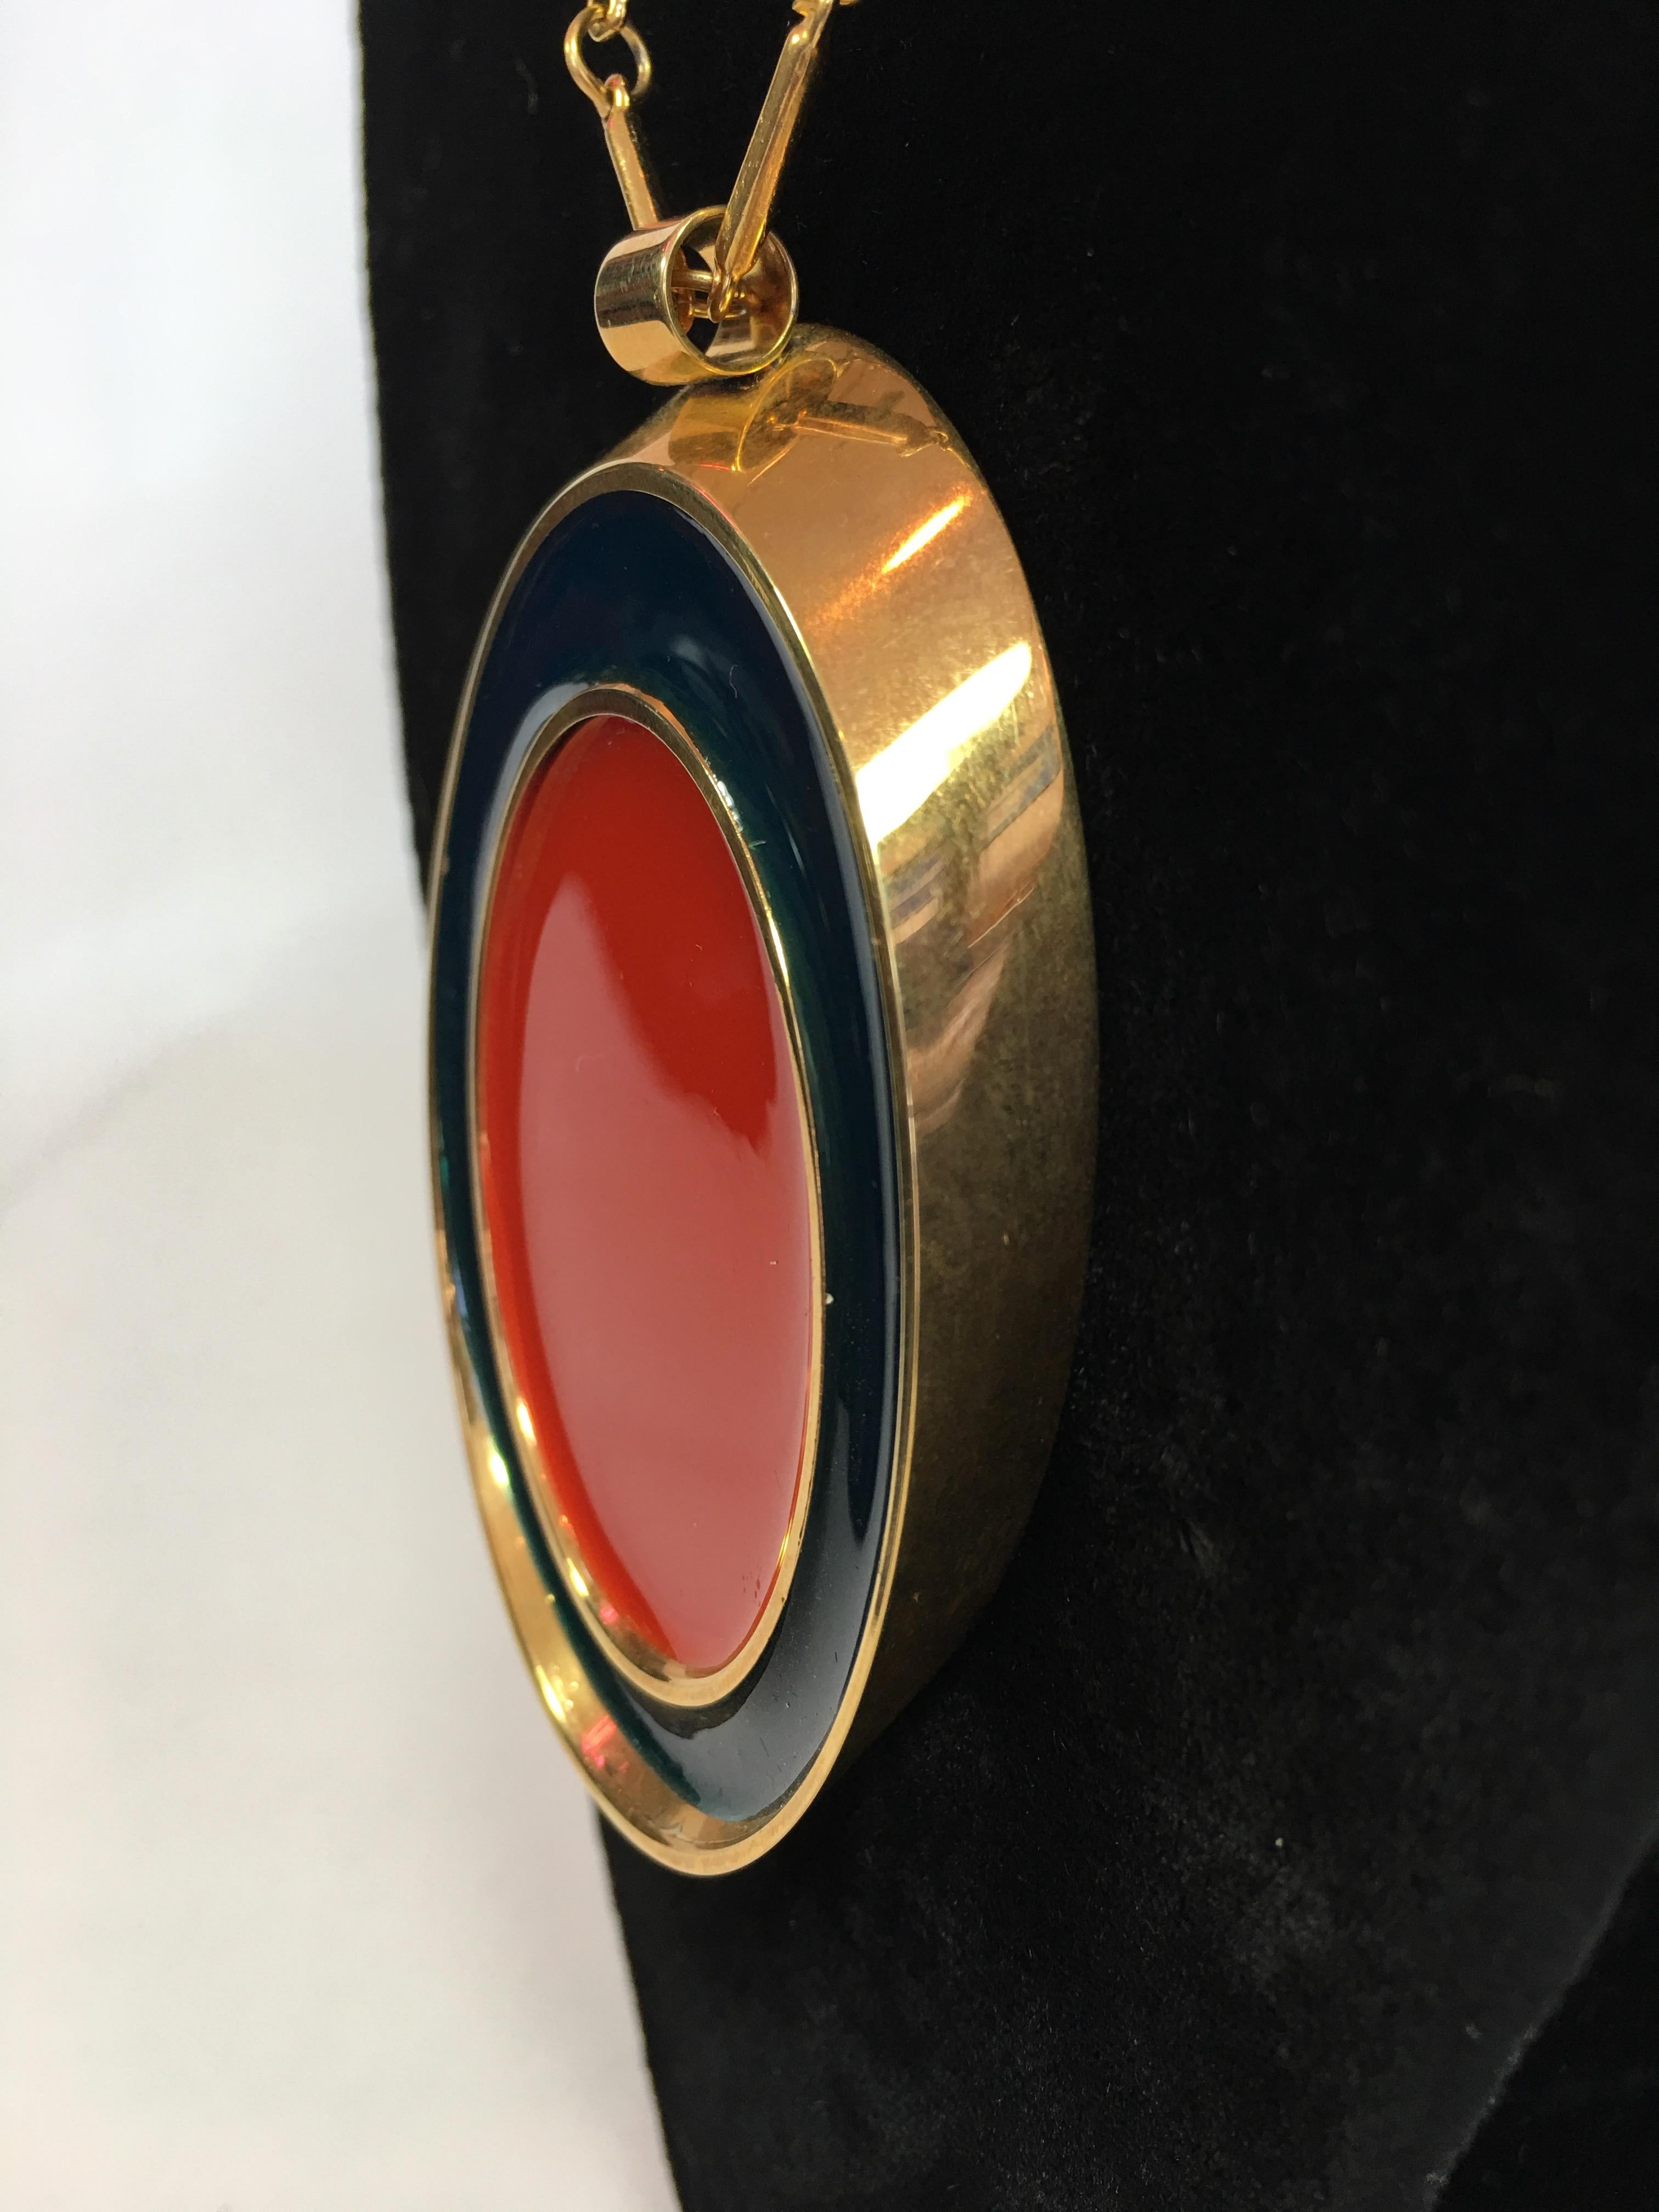 Guy Laroche Gold Tone Necklace with Red + Navy Enamel Plated Oval Pendant from the 1960's. Pendant is reversible and is the same Navy + Red design on both sides. Chain is part of the design feature. Guy Laroche tag at the back neck hook. See photo.